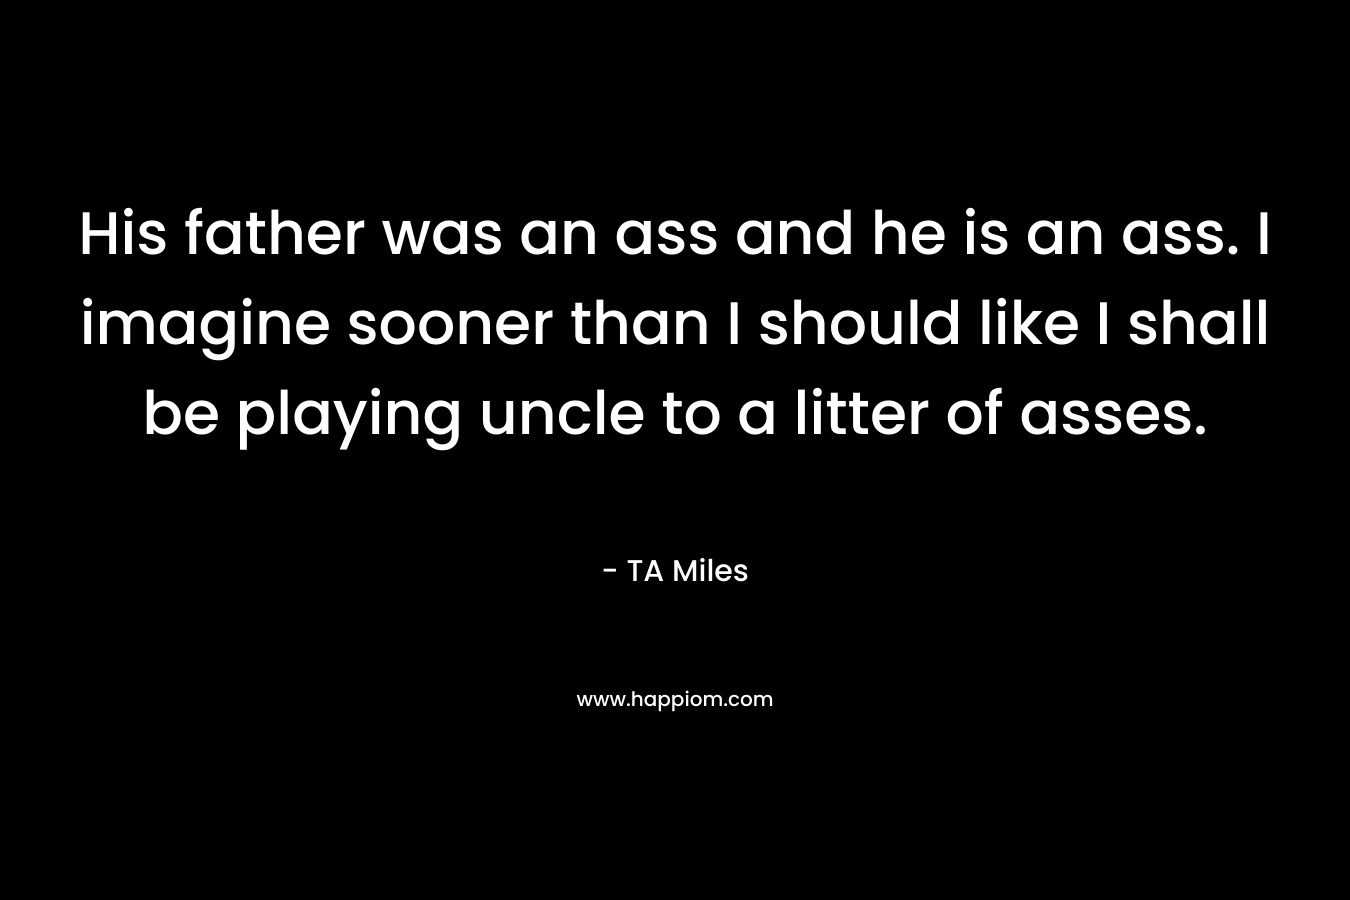 His father was an ass and he is an ass. I imagine sooner than I should like I shall be playing uncle to a litter of asses.